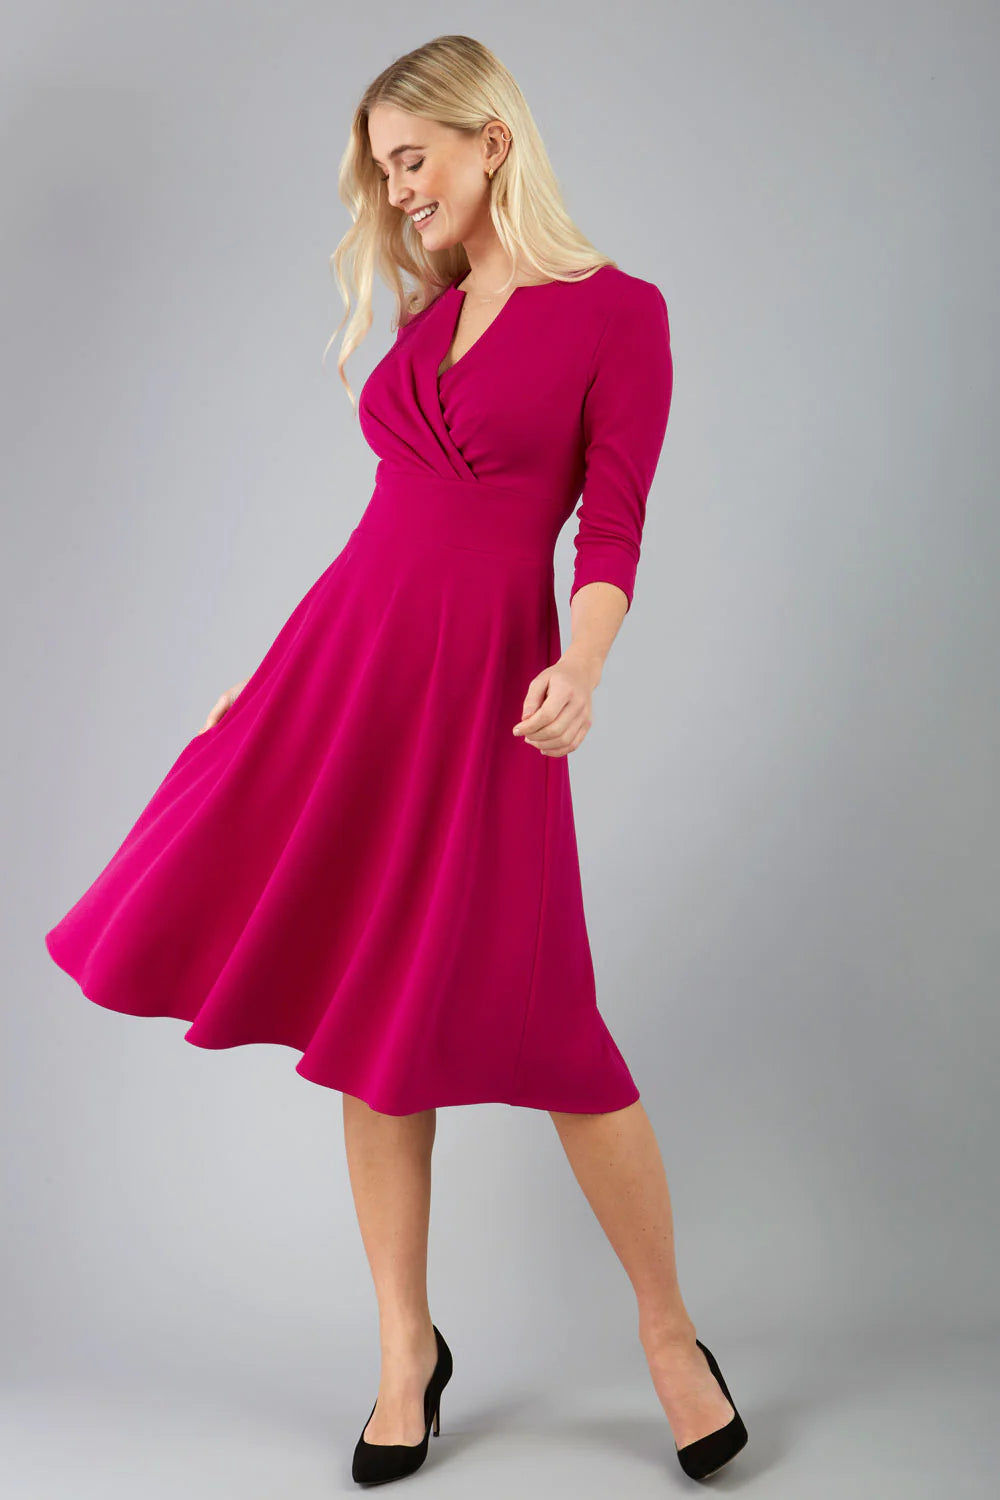 Women' Business January Dress - Magenta NORA GARDNER | OFFICIAL STORE for work and office